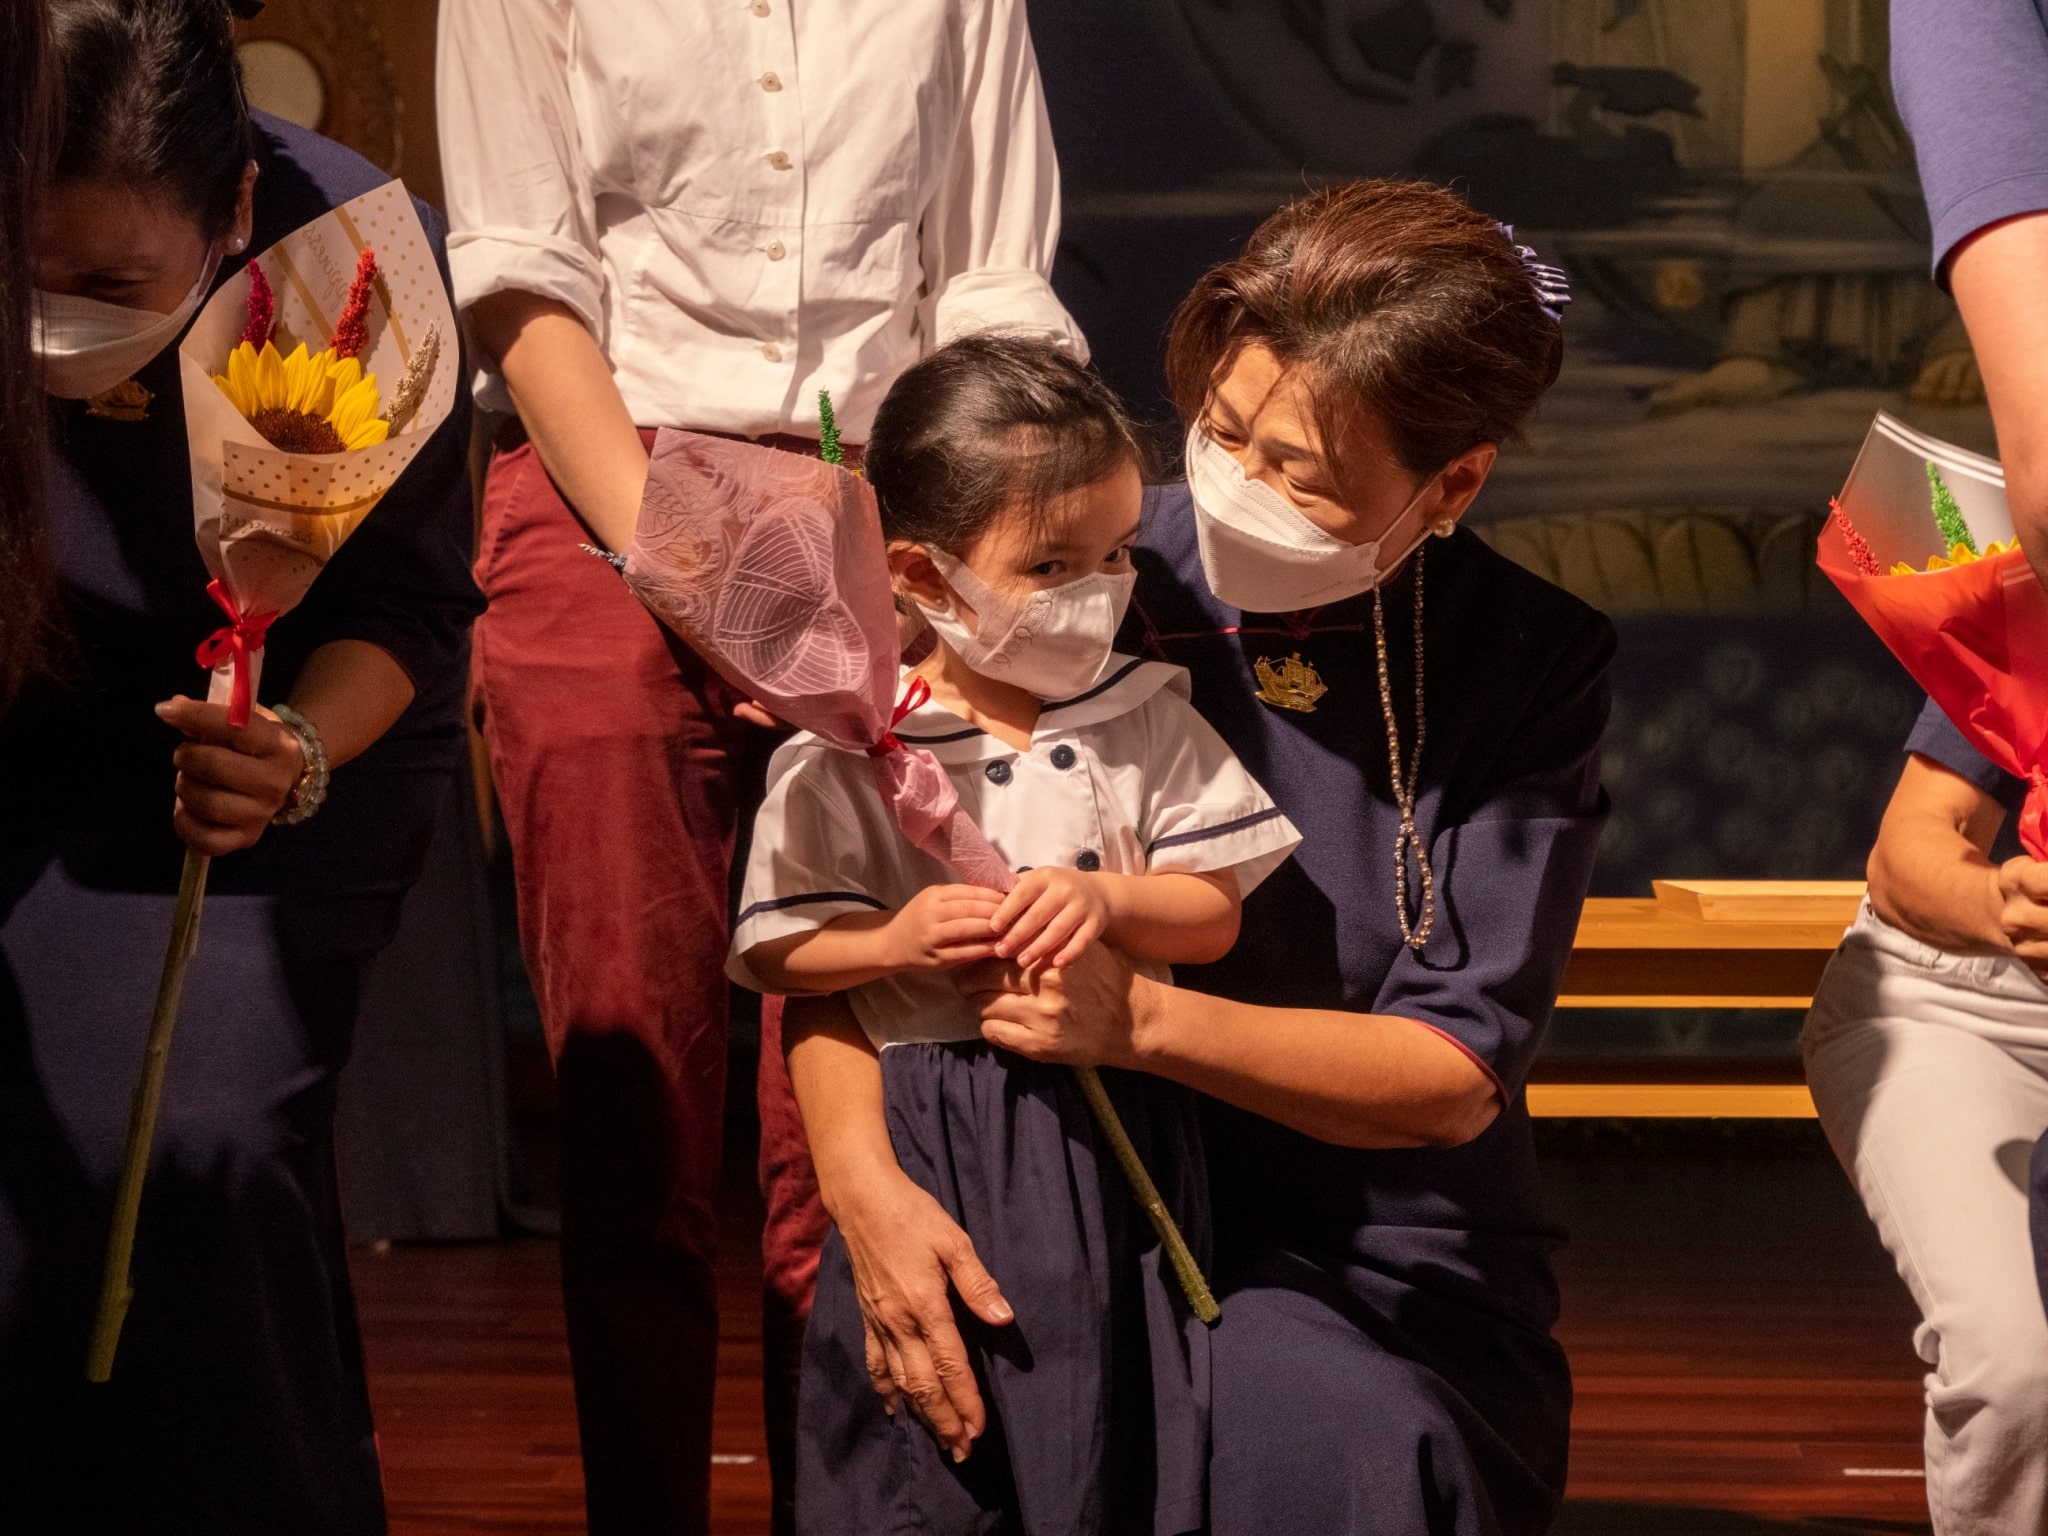 Preschool student gives flowers to her grandmother who is a Tzu Chi volunteer. 【Photo by Matt Serrano】